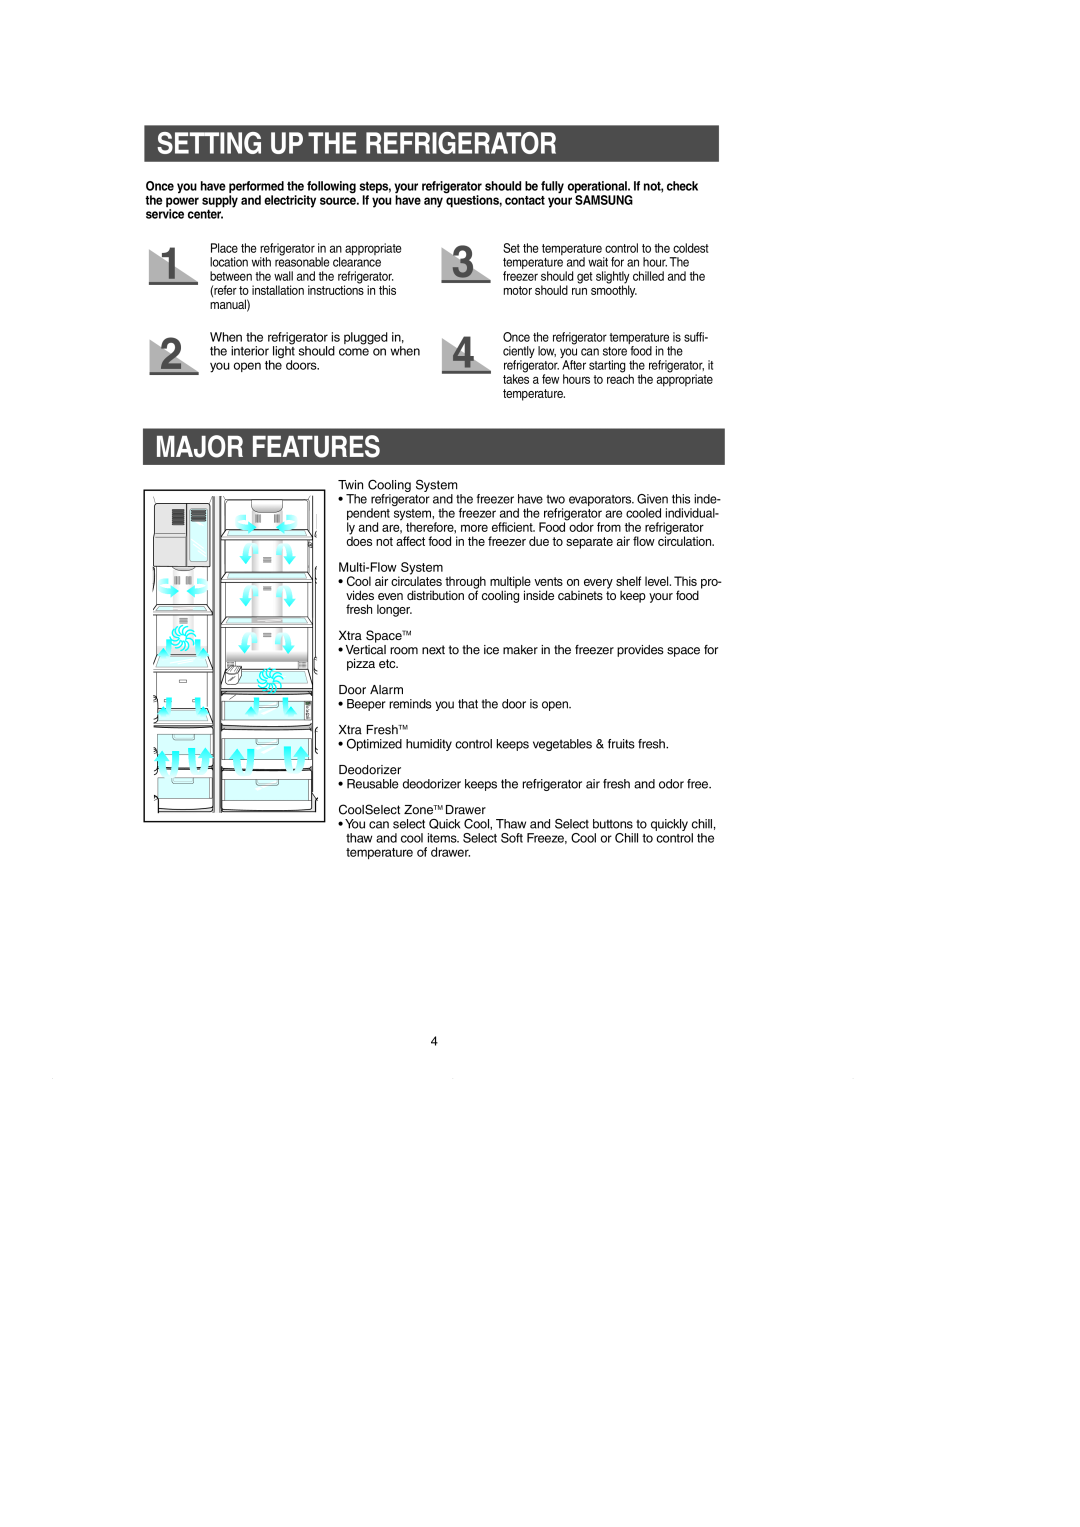 Samsung RH269LBSH owner manual Setting Up The Refrigerator, Major Features, service center 